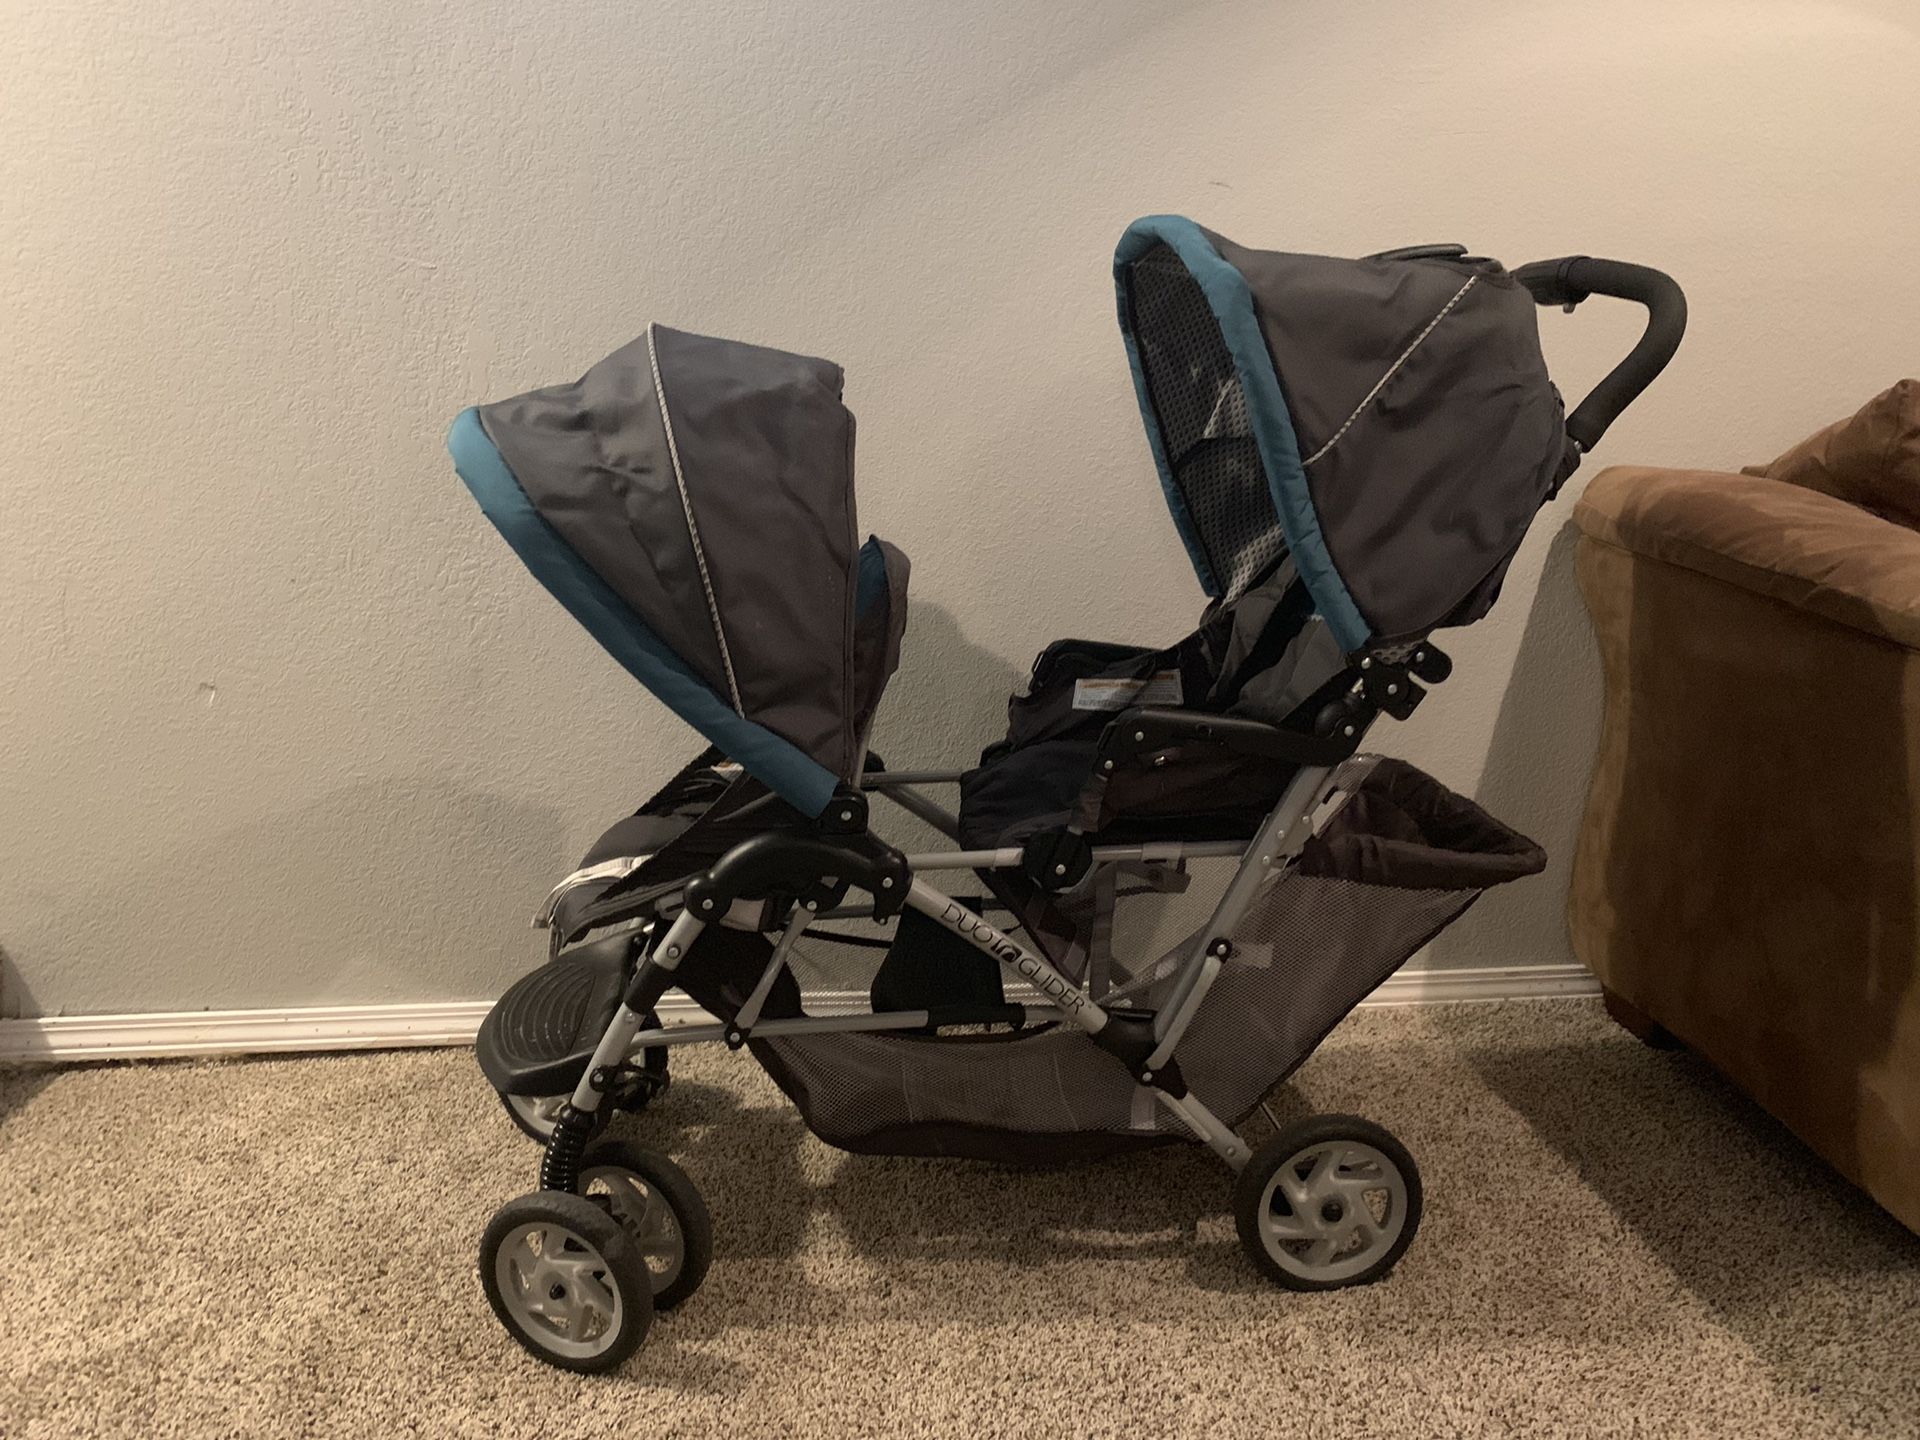 Graco DuoGlider Double Stroller with car seat